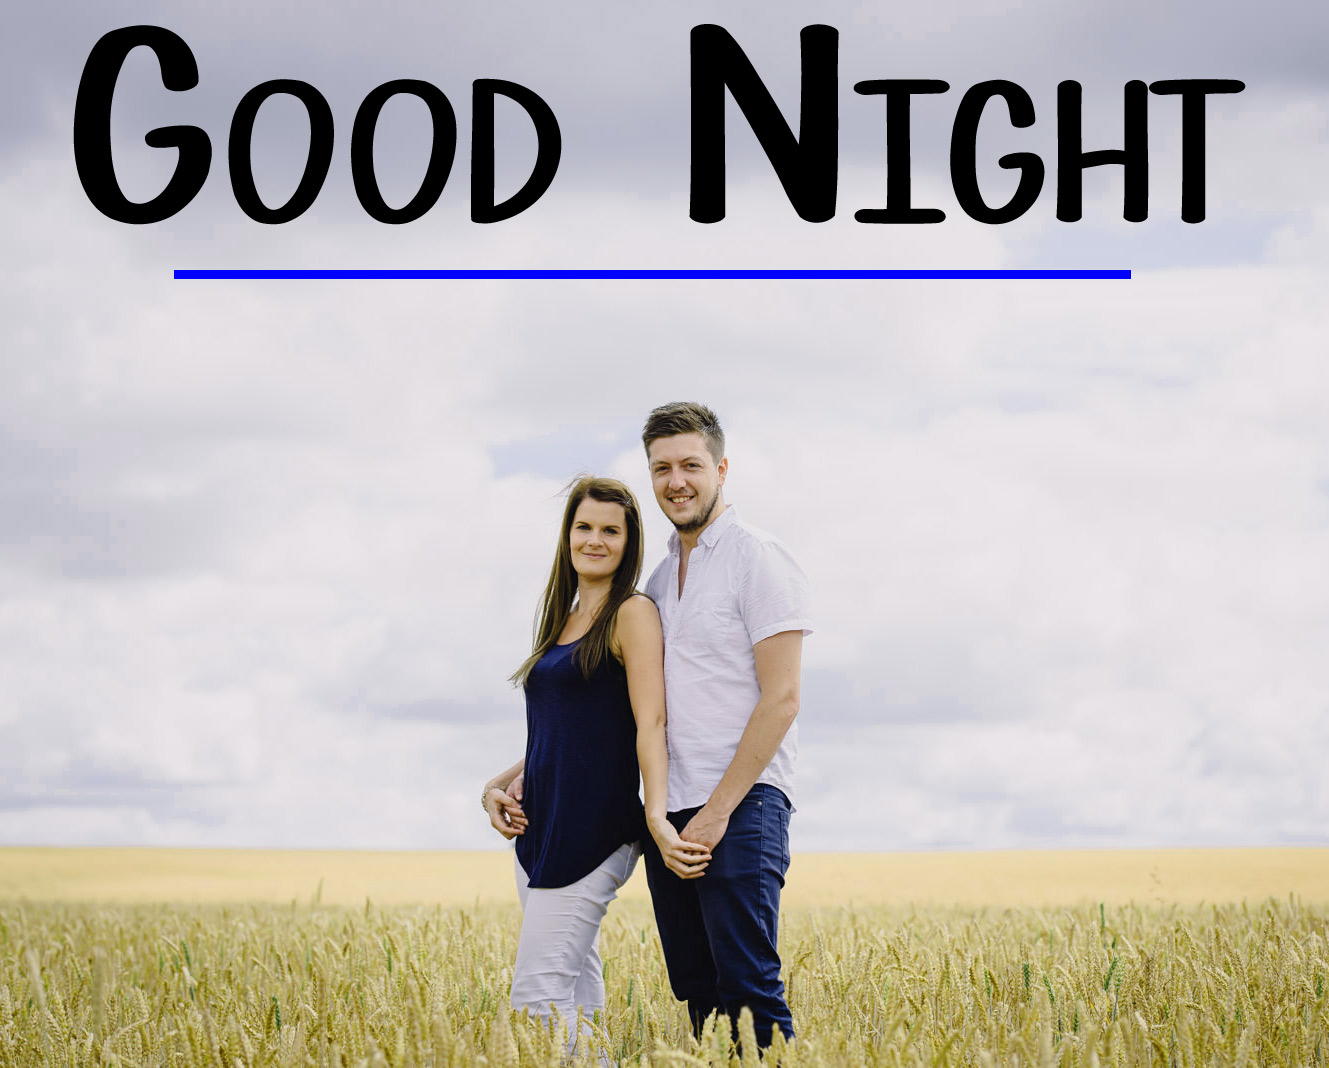 Good Night Images Download for Sweet Love Couple 